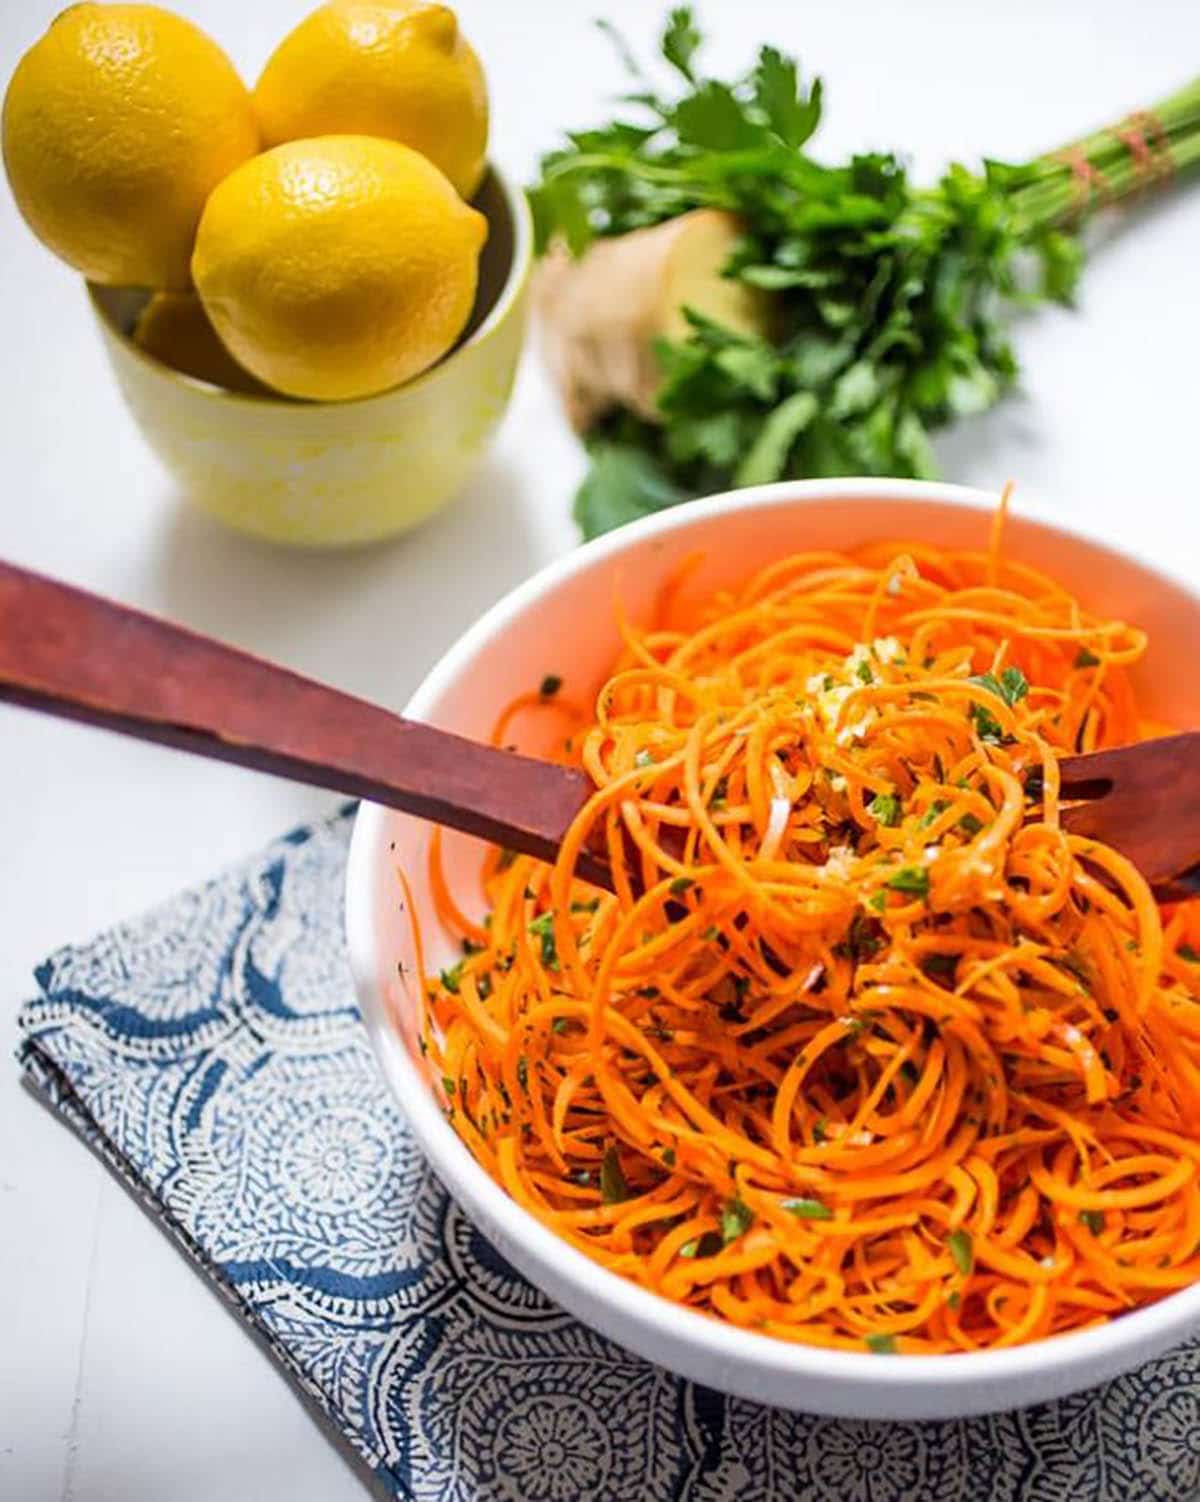 Carrot Salad with Parsley Topped with Lemon Ginger Dressing